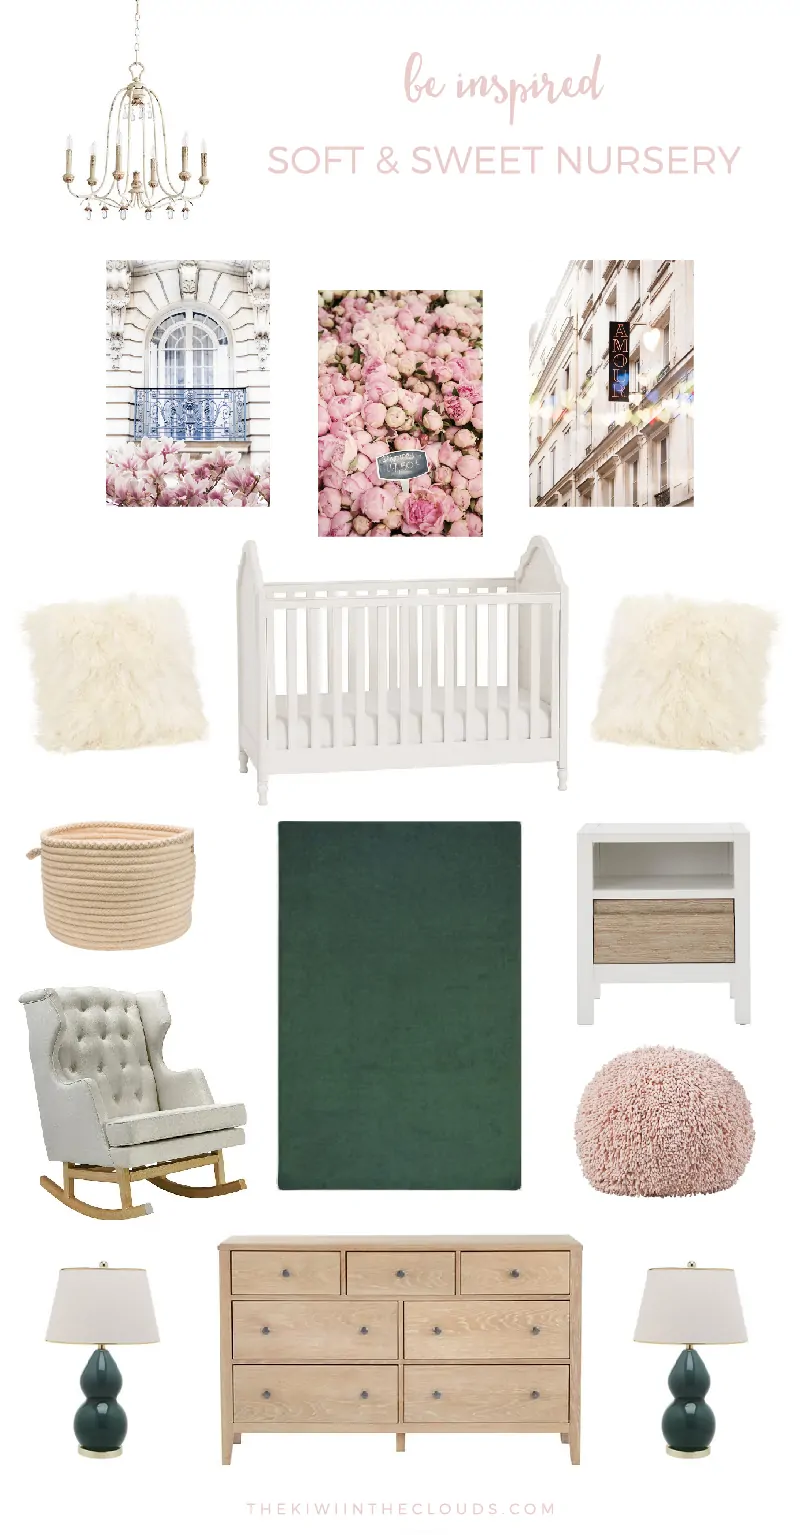 Soft And Sweet Nursery | Inspired by the serenity and innocence of a newborn, this little girl's nursery is calming and beautiful. Click through for the entire source list.